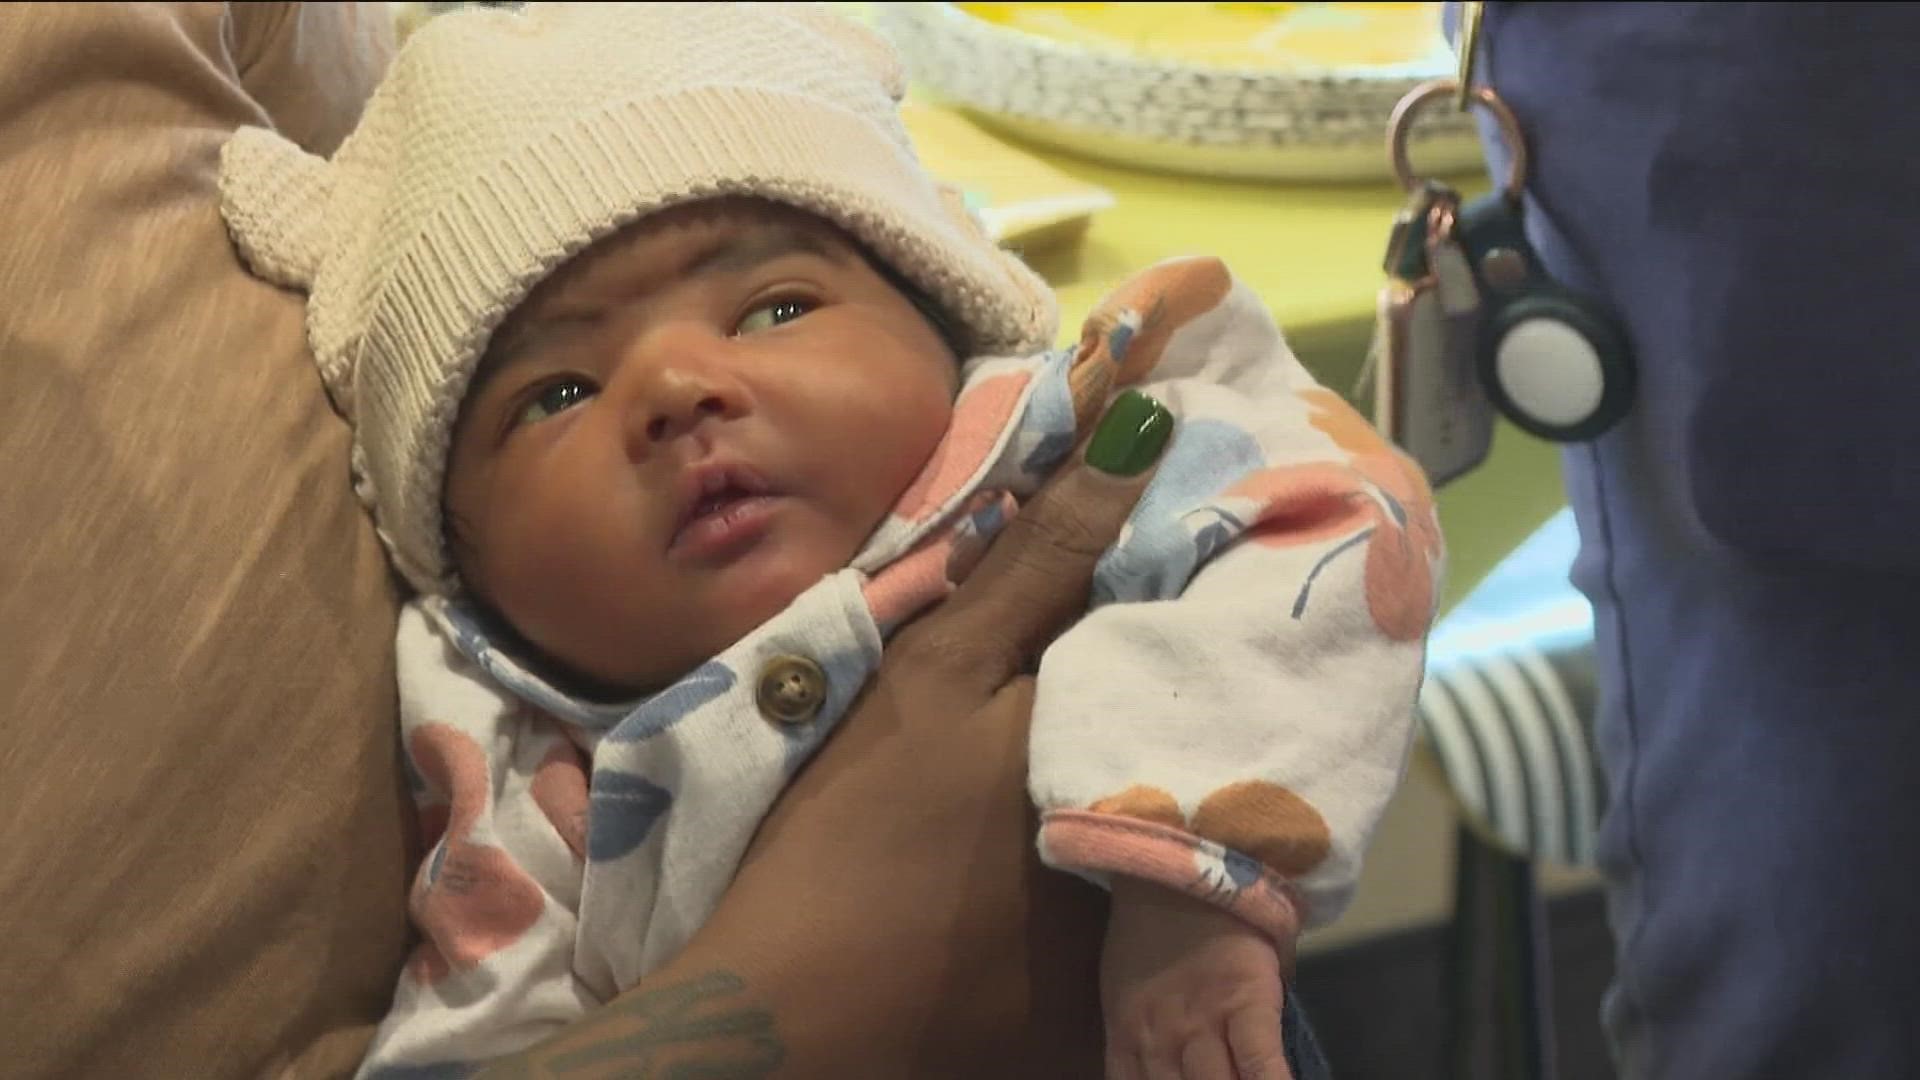 11Alive was the only station to bring you the story of the baby girl, who's been nicknamed "Little Nugget," as the story goes viral worldwide.